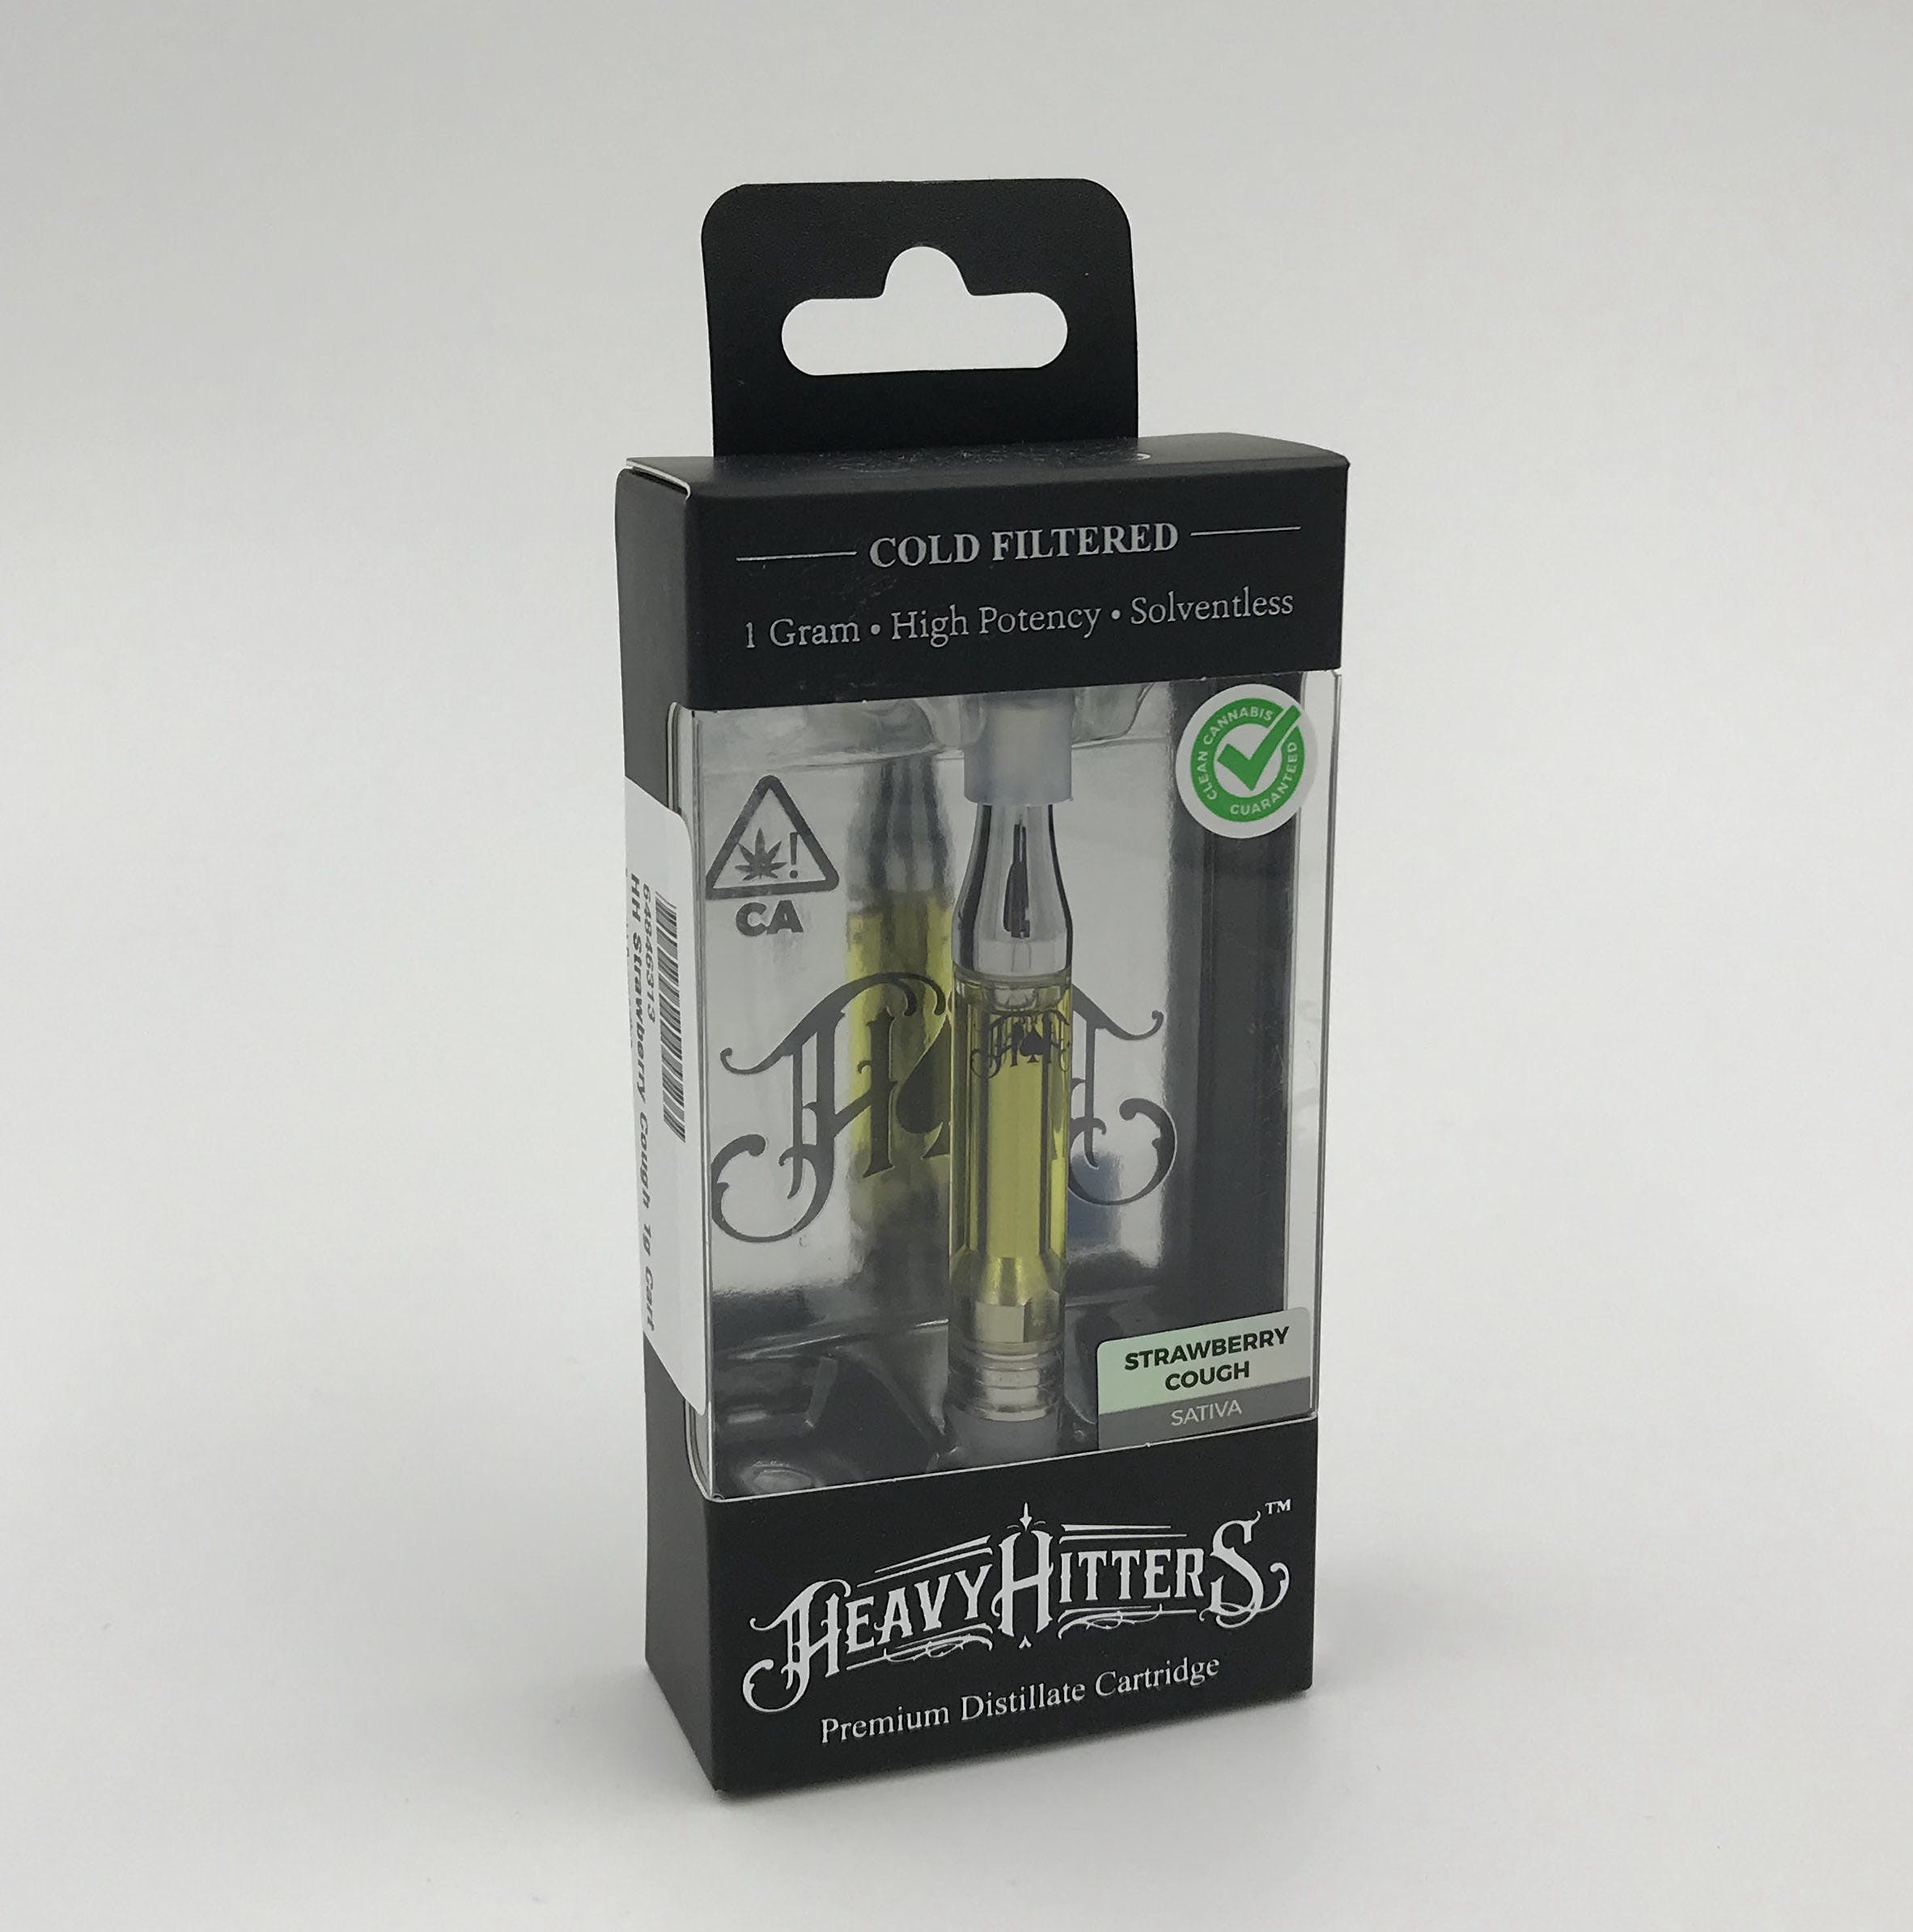 concentrate-heavy-hitters-strawberry-cough-cartridges-by-heavy-hitters